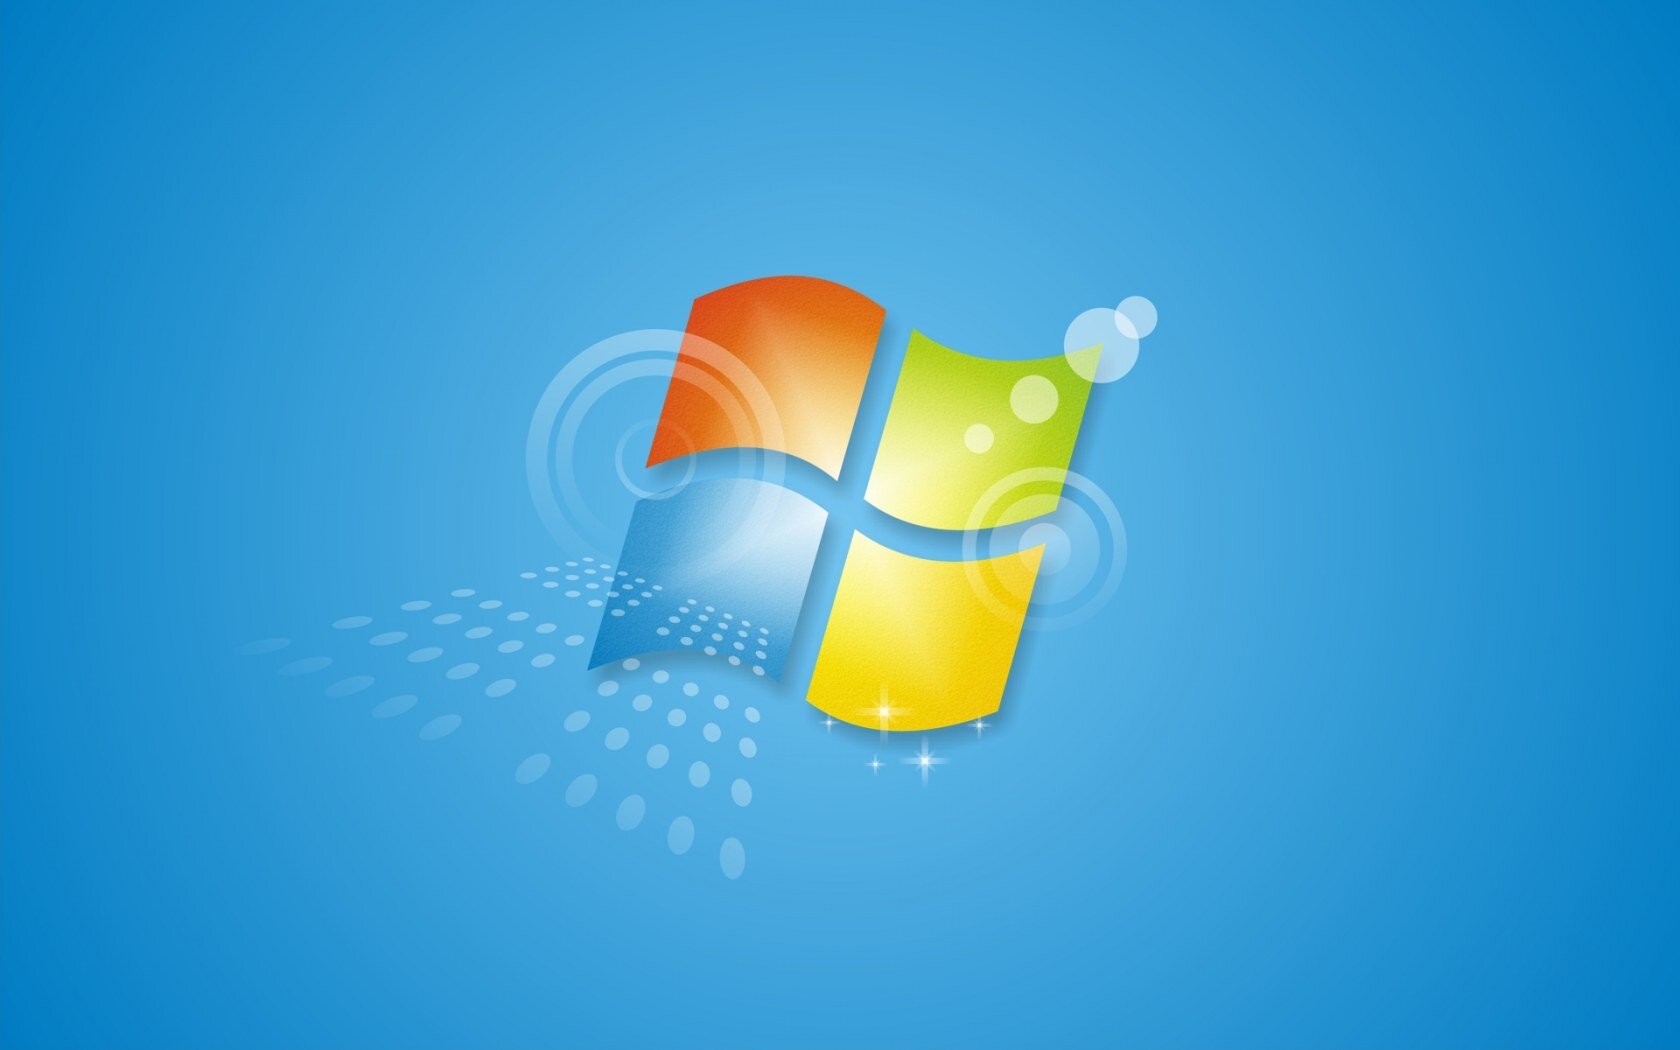 windows 7 iso file download for android phone